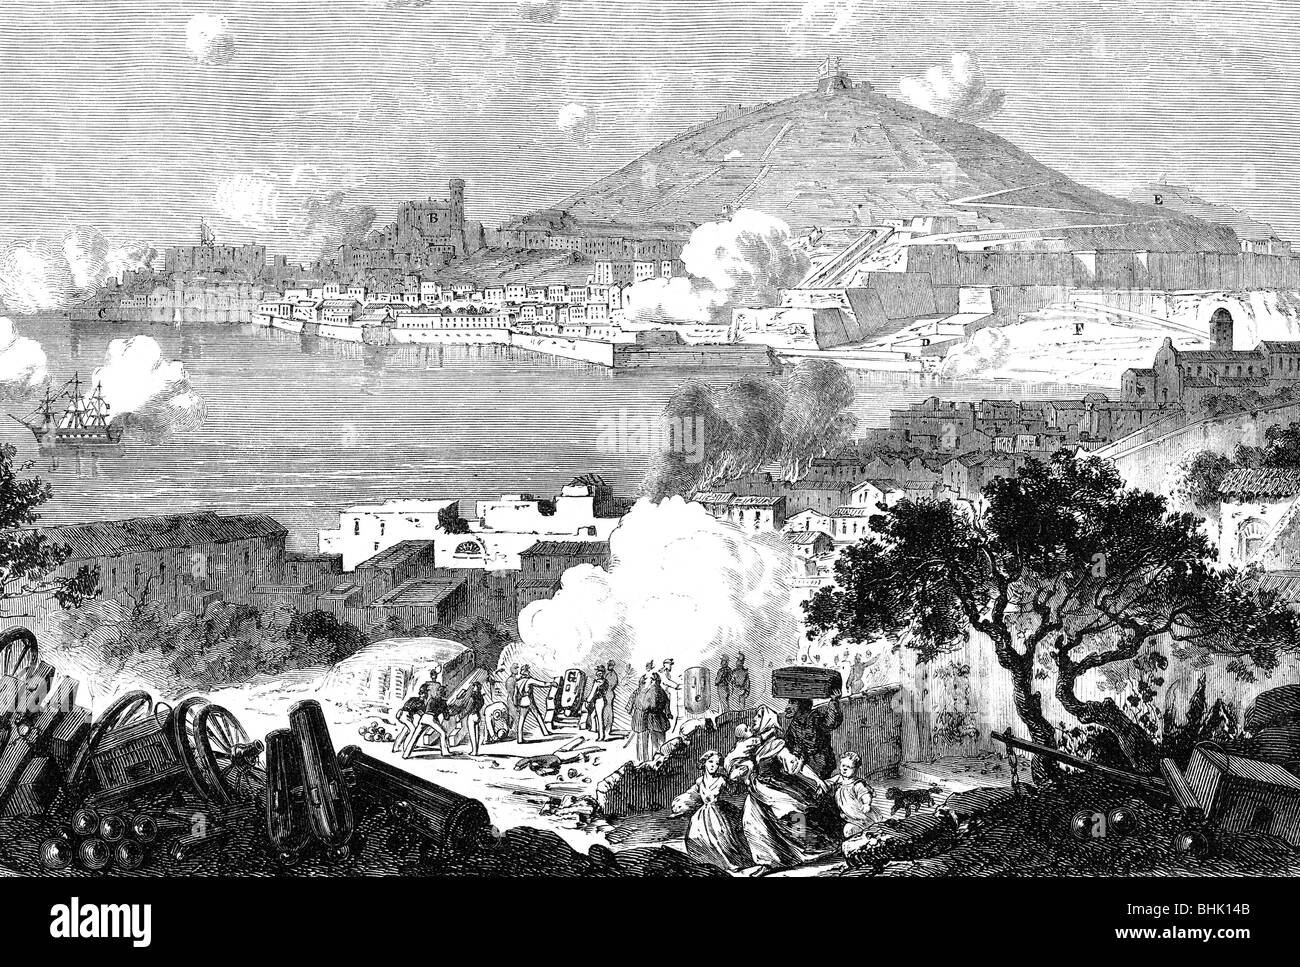 events, 'Expedition of the Thousand', 1860, siege of Gaeta, 5.11.1860 - 12.2.1861, wood engraving, 19th century, , Stock Photo